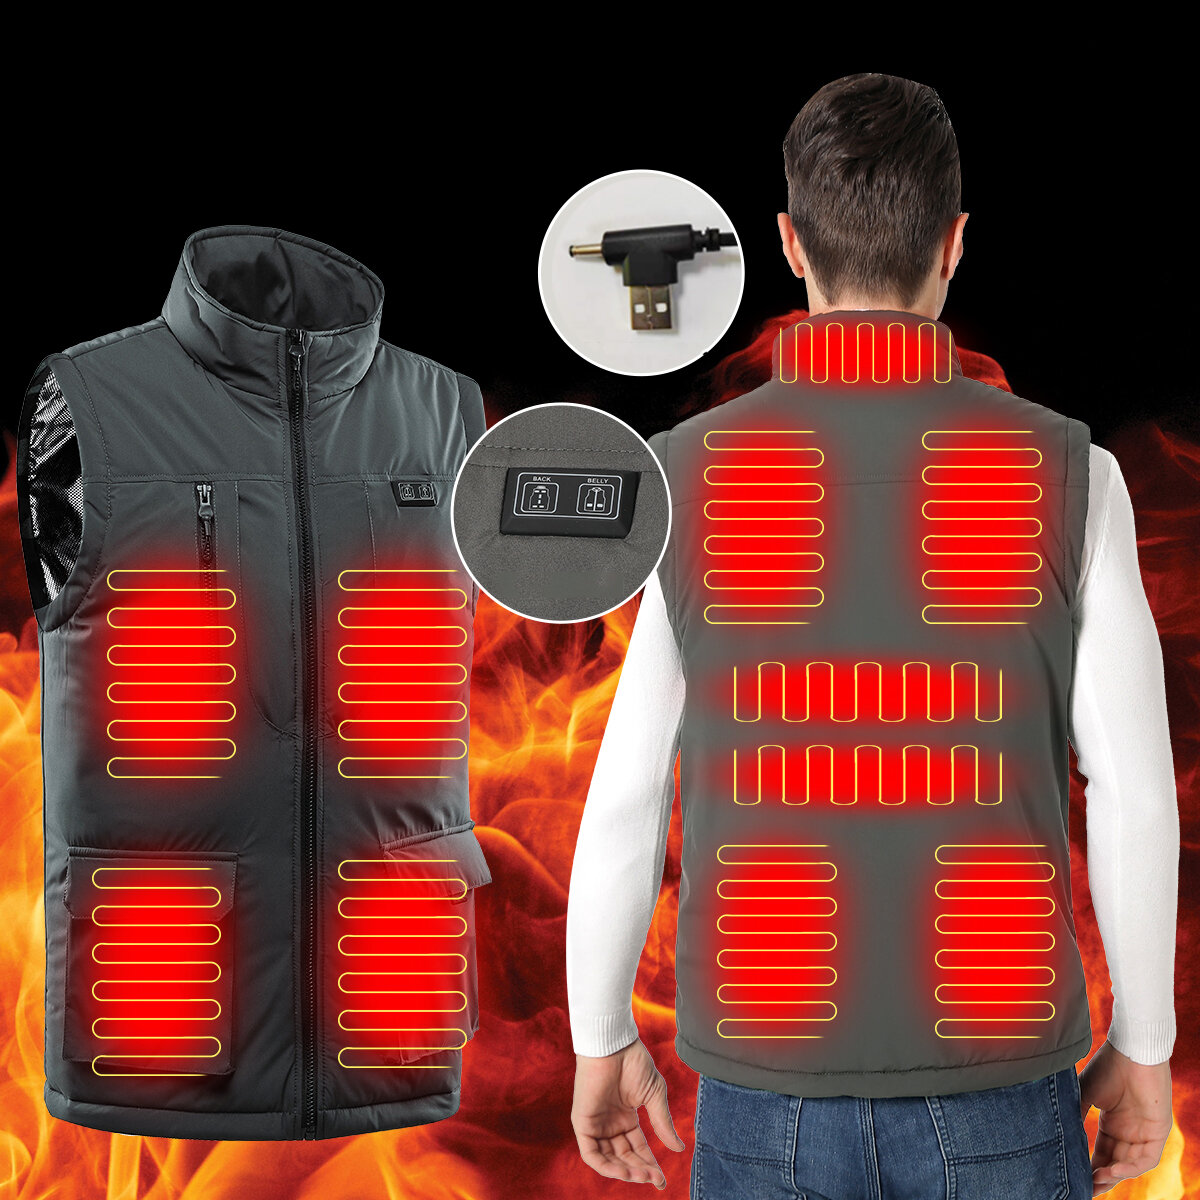 11 Zone Intelligent Heating Smart Electric Heated Vest Warm Comfortable Winter Heated Jacket for Adult